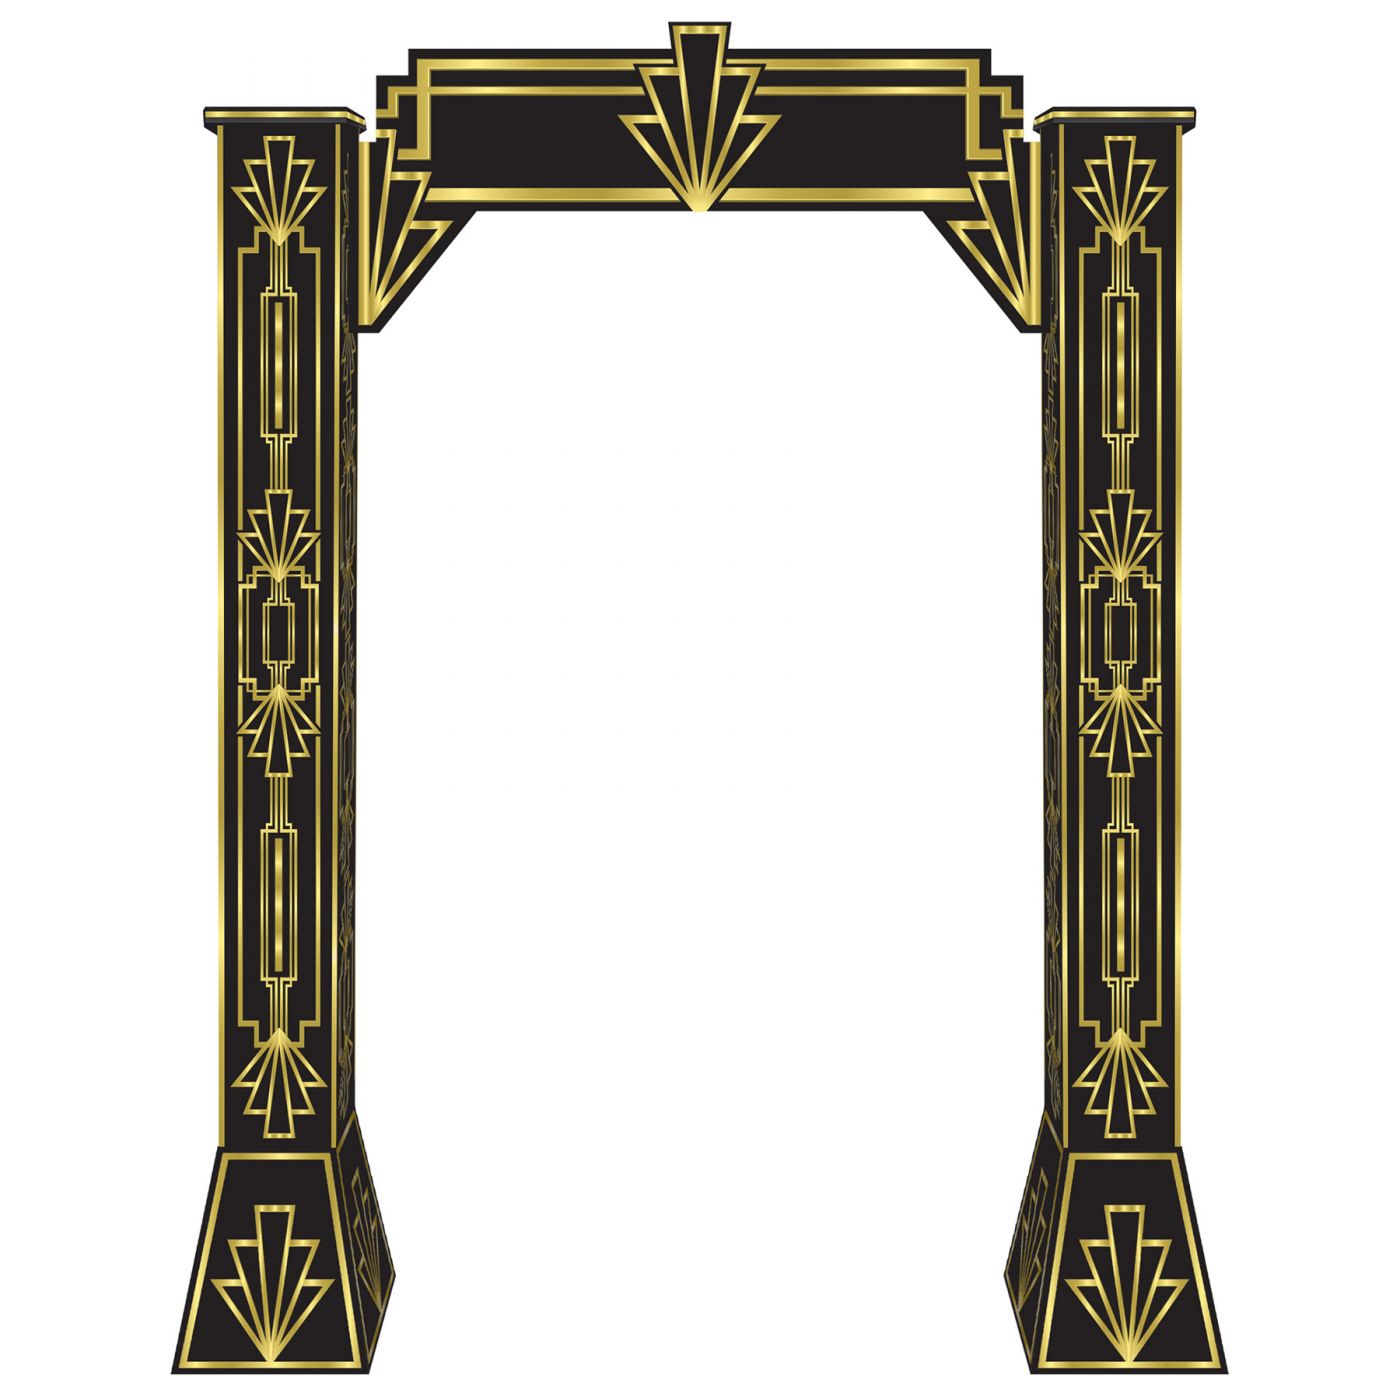 Great 20's 3-D Archway Prop (1) image